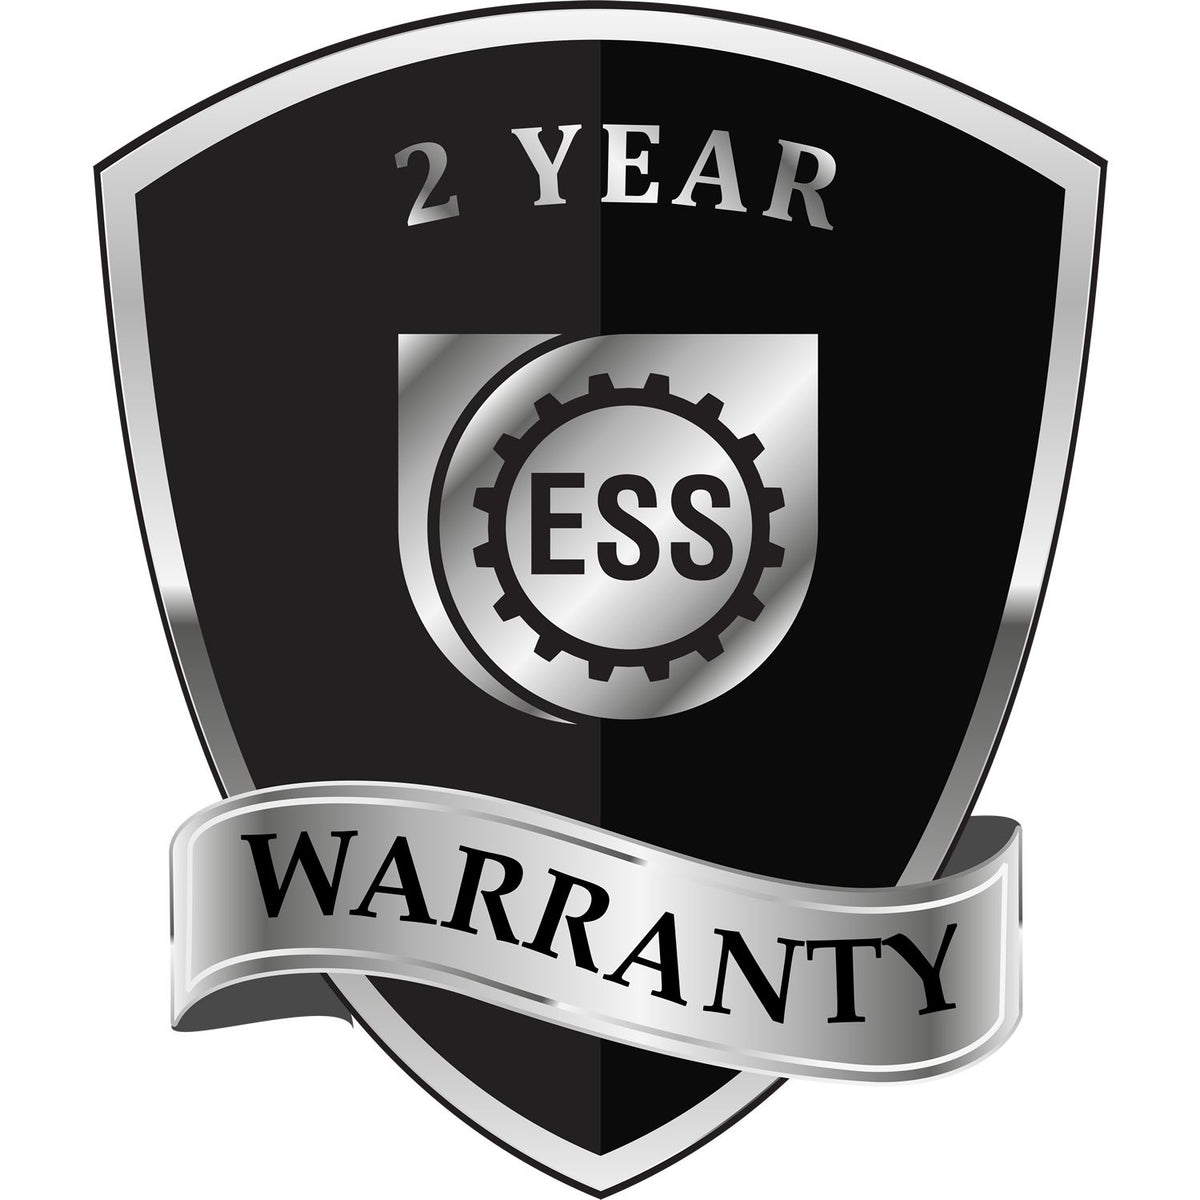 A black and silver badge or emblem showing warranty information for the Handheld Hawaii Professional Geologist Embosser